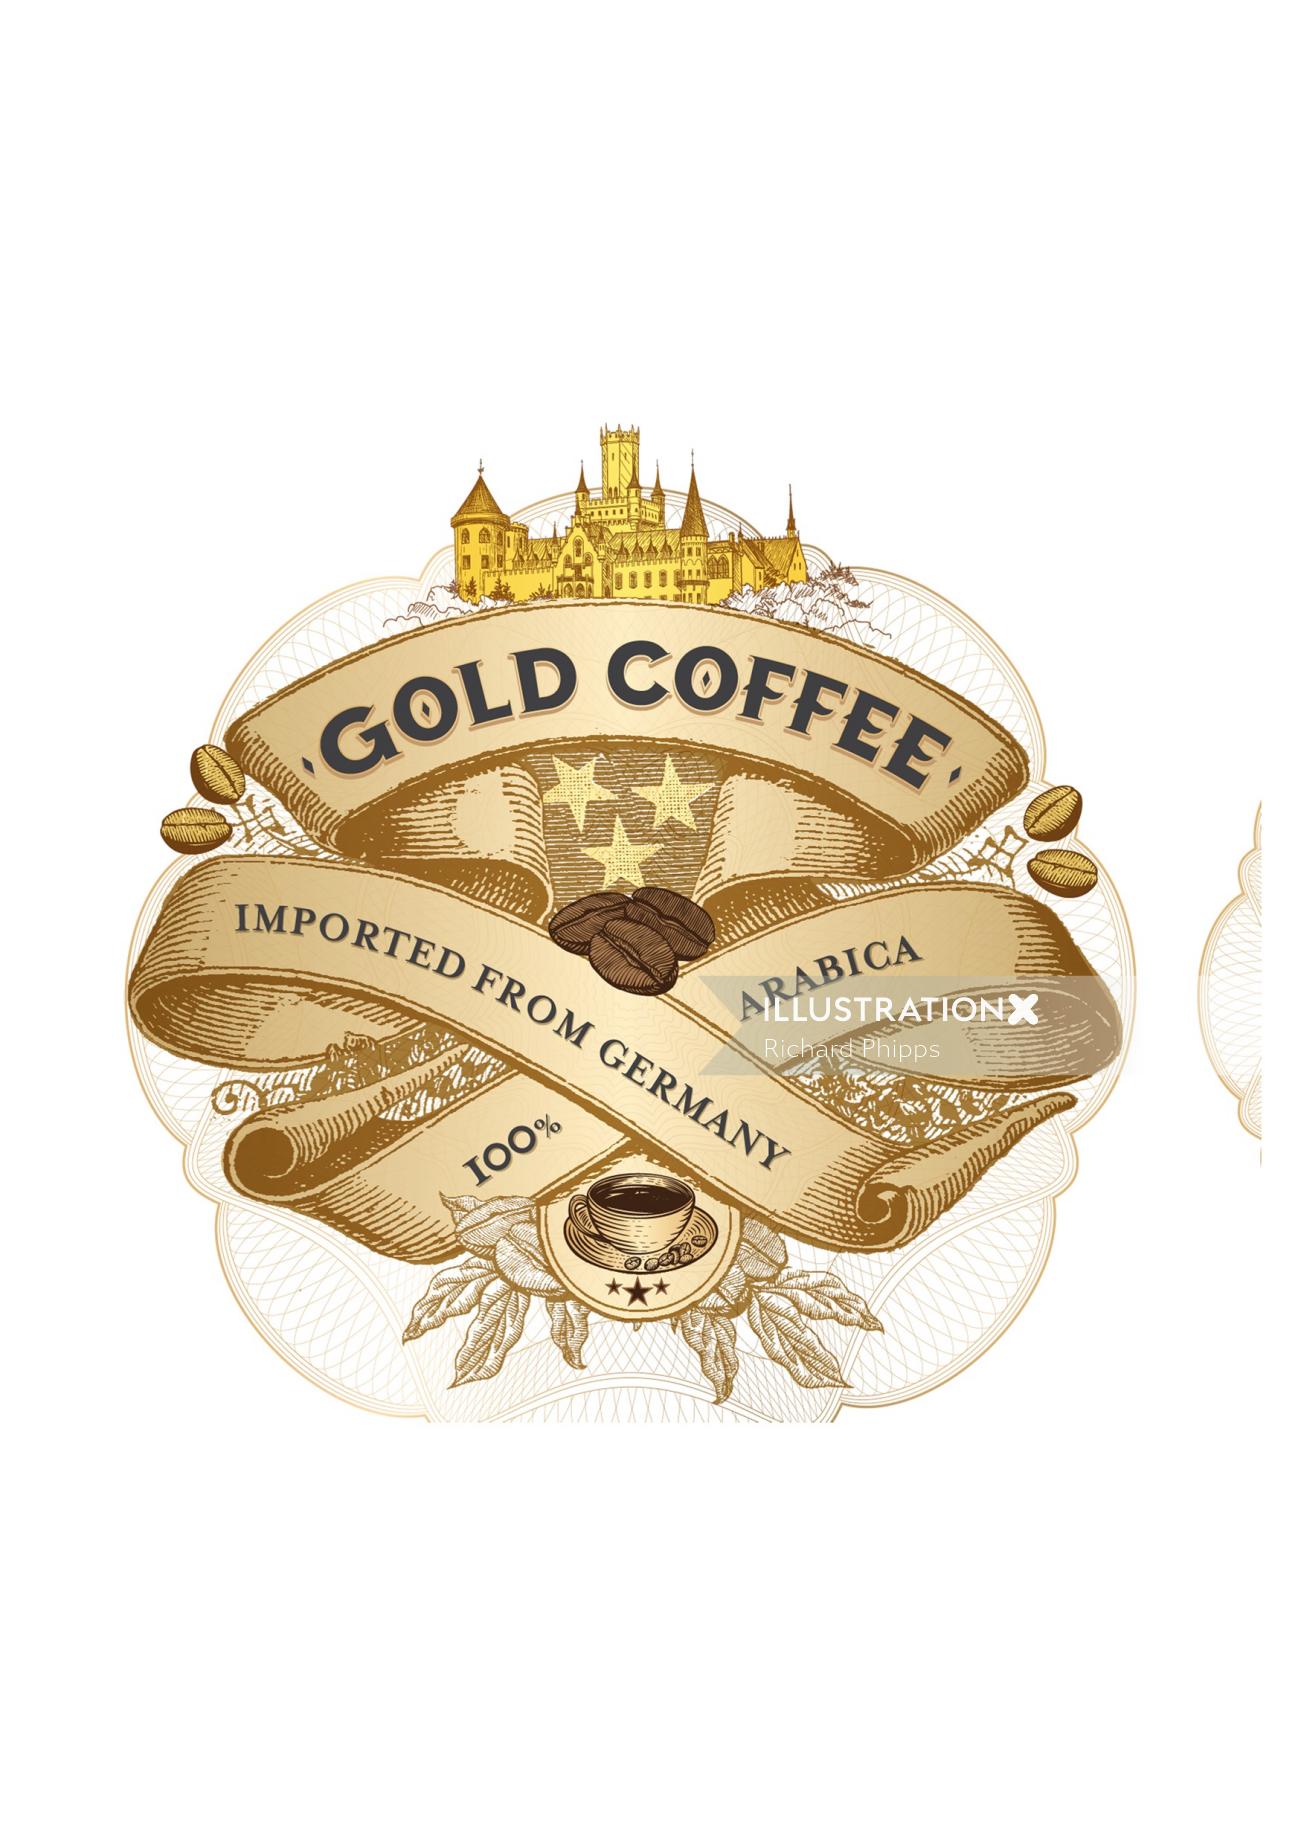 Poster design of gold coffee 